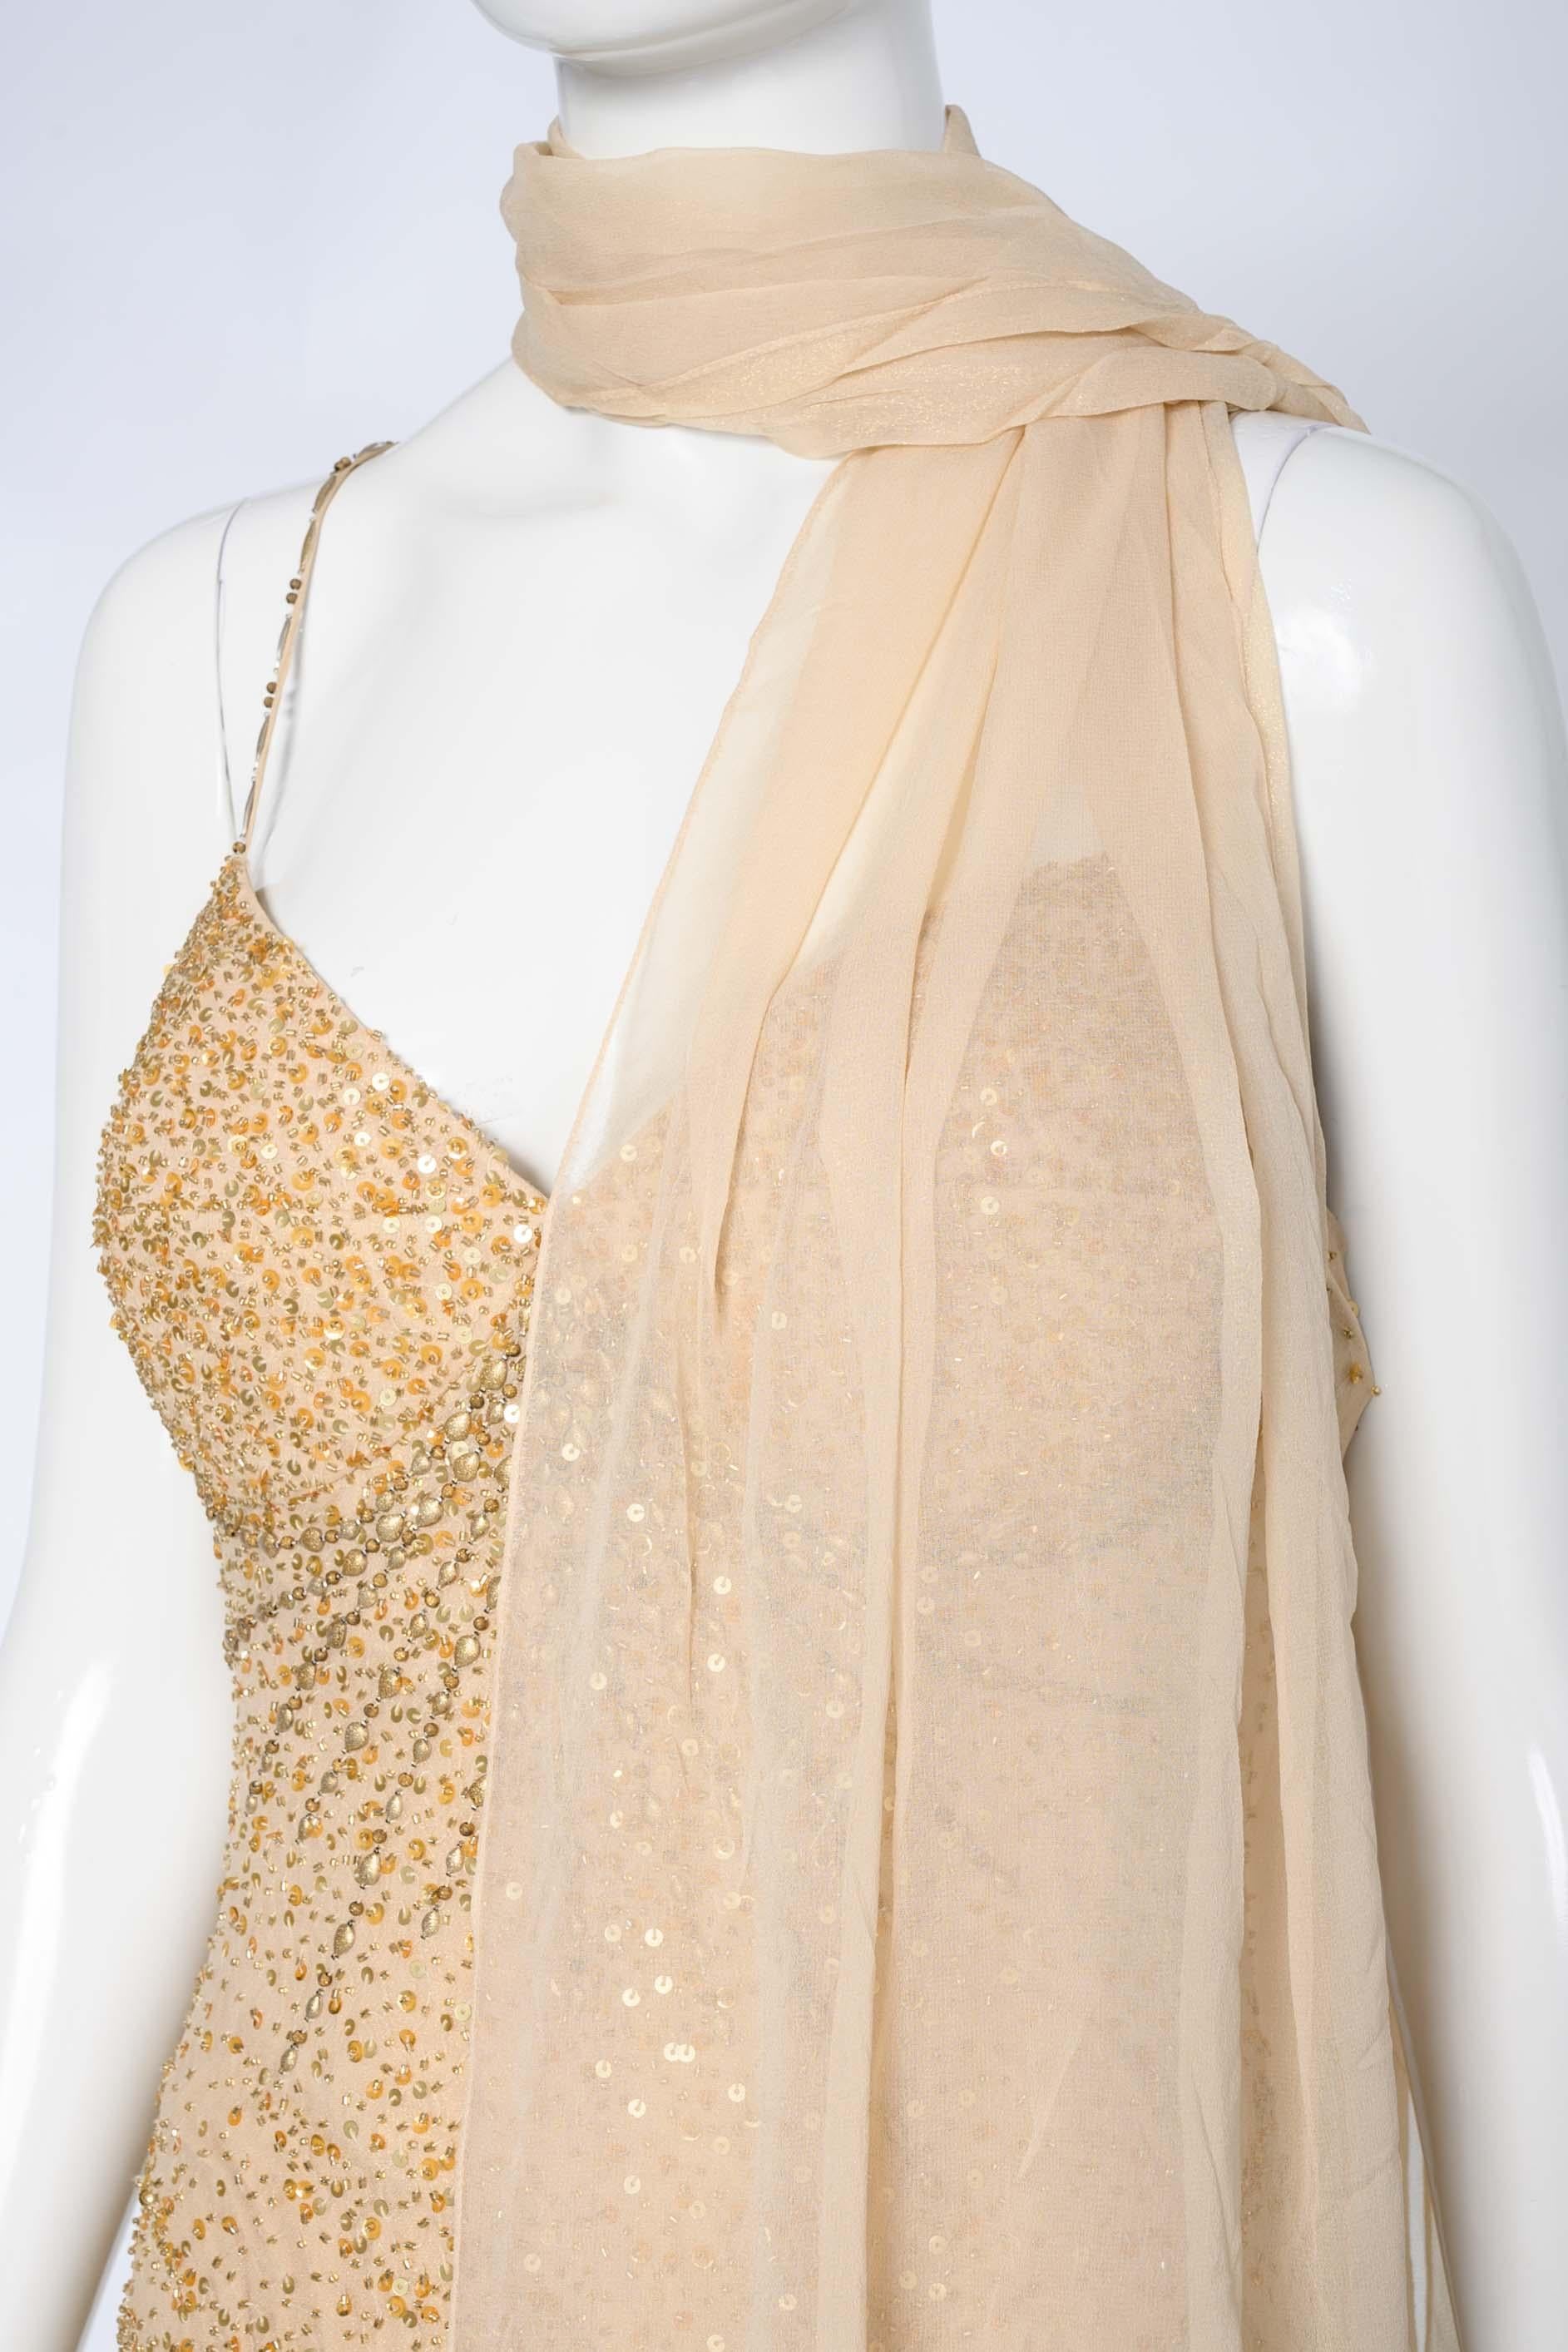 2000s Diane Freis Gold Sequinned Evening Dress In Excellent Condition For Sale In Hong Kong, HK